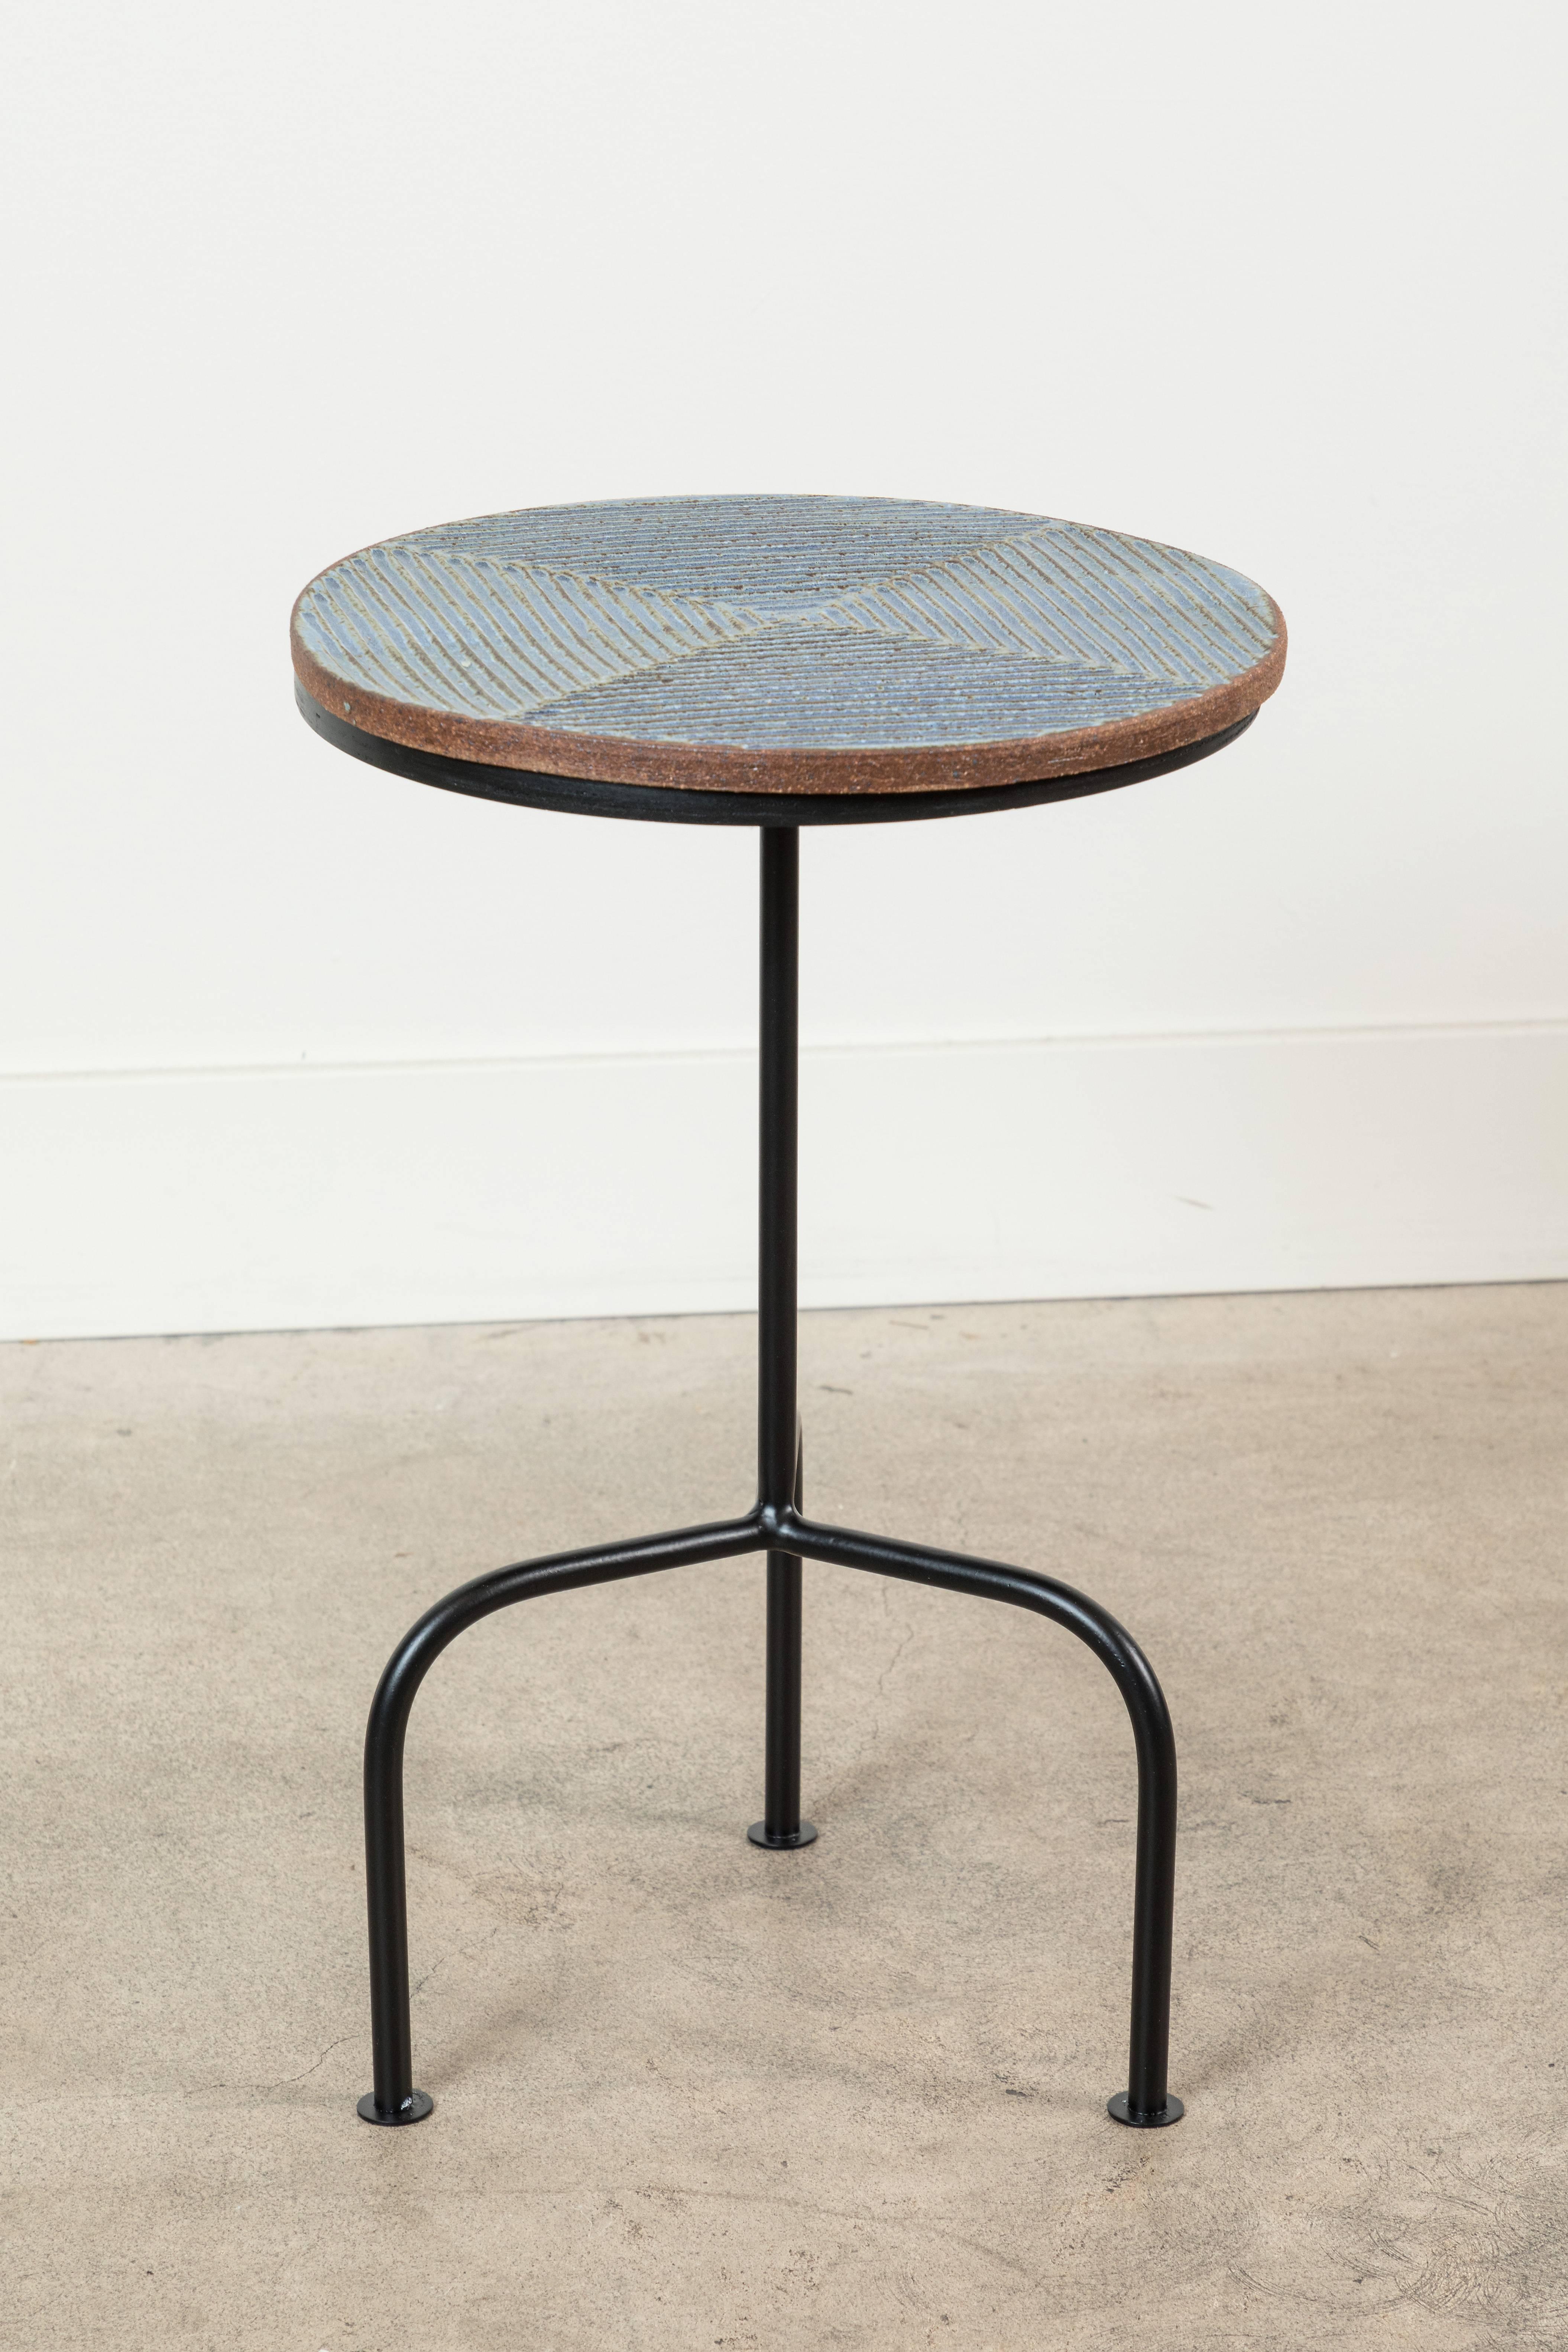 Contemporary Steel and Ceramic Side Table by Mt. Washington Pottery for Lawson-Fenning